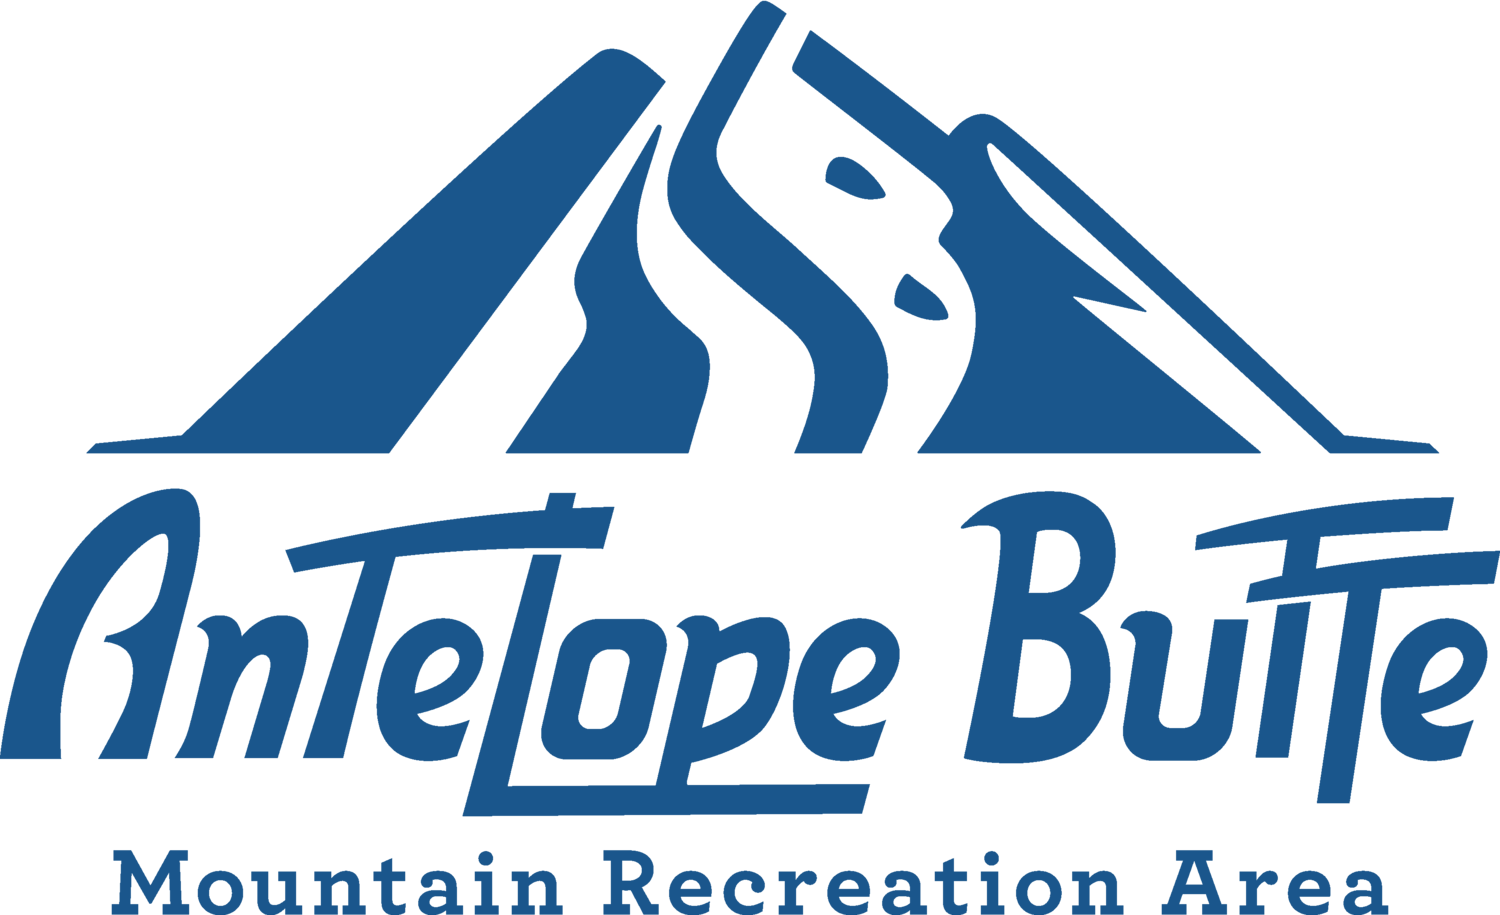 Antelope Butte Foundation 